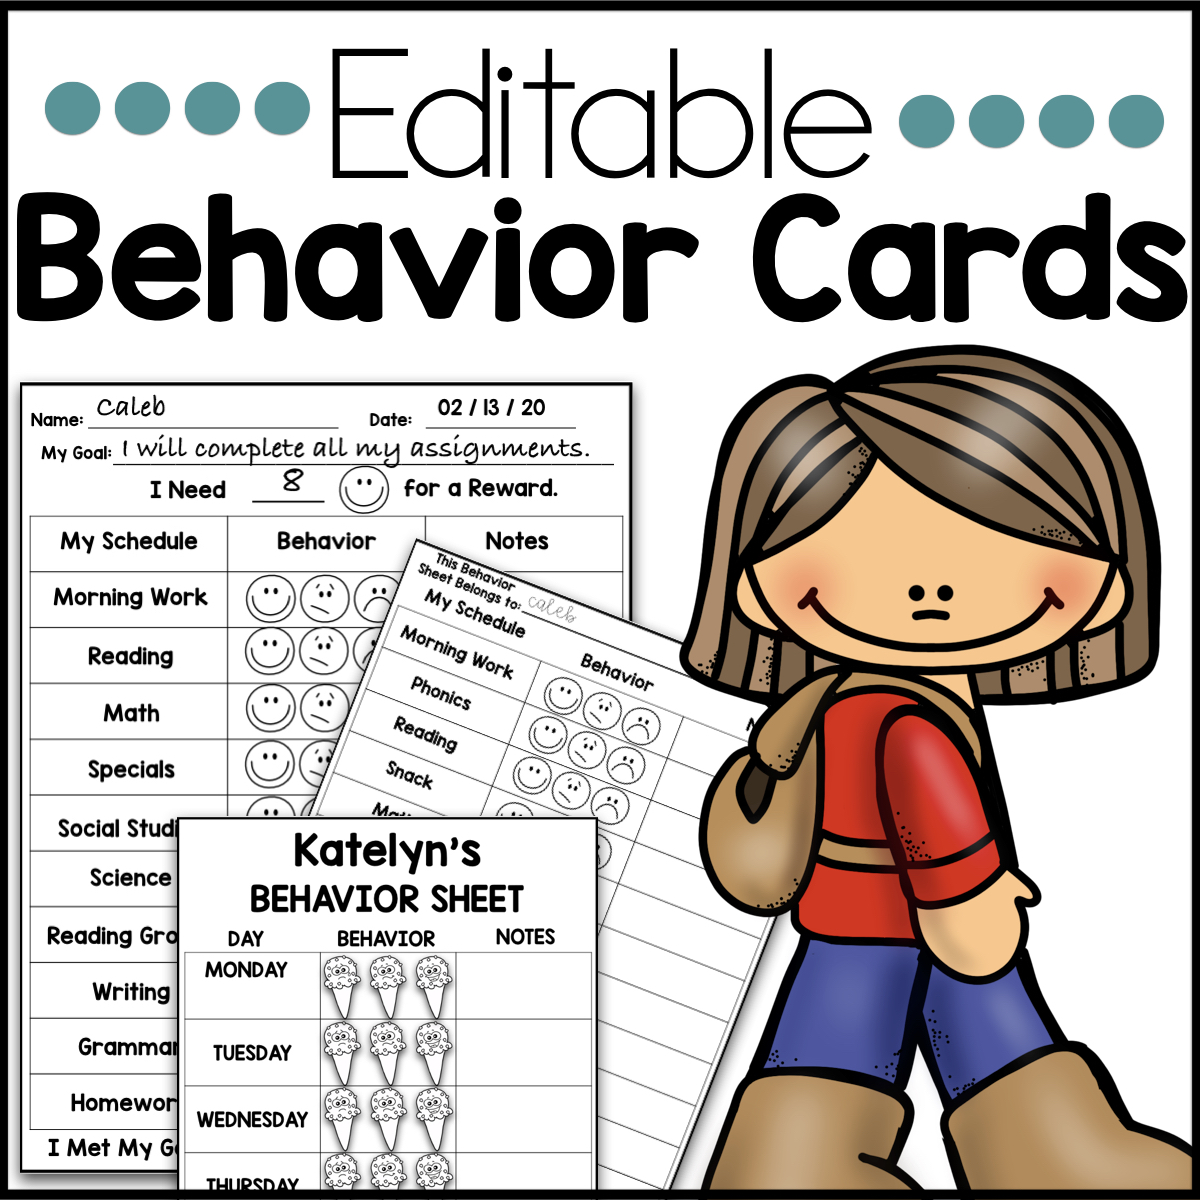 how-to-use-behavior-charts-in-the-classroom